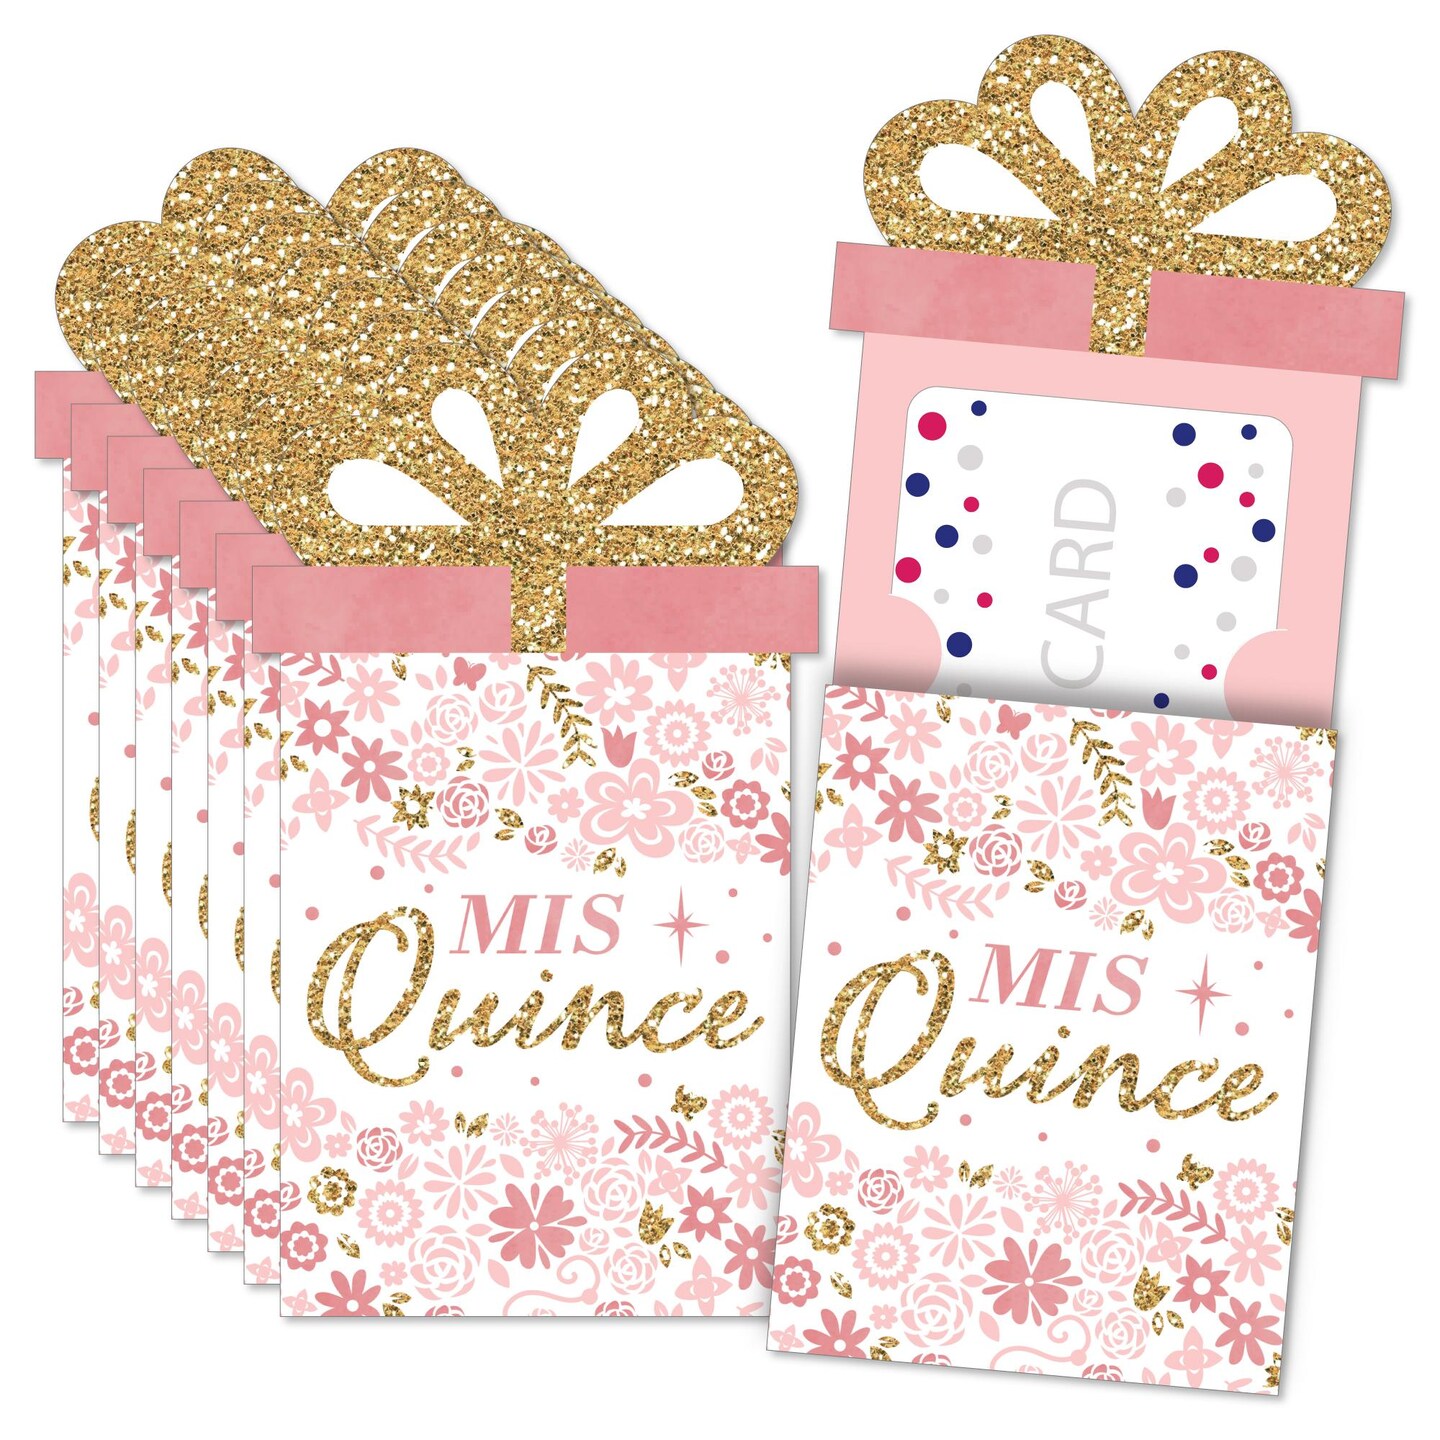 Big Dot of Happiness Mis Quince Anos - Quinceanera Sweet 15 Birthday Party Money and Gift Card Sleeves - Nifty Gifty Card Holders - Set of 8